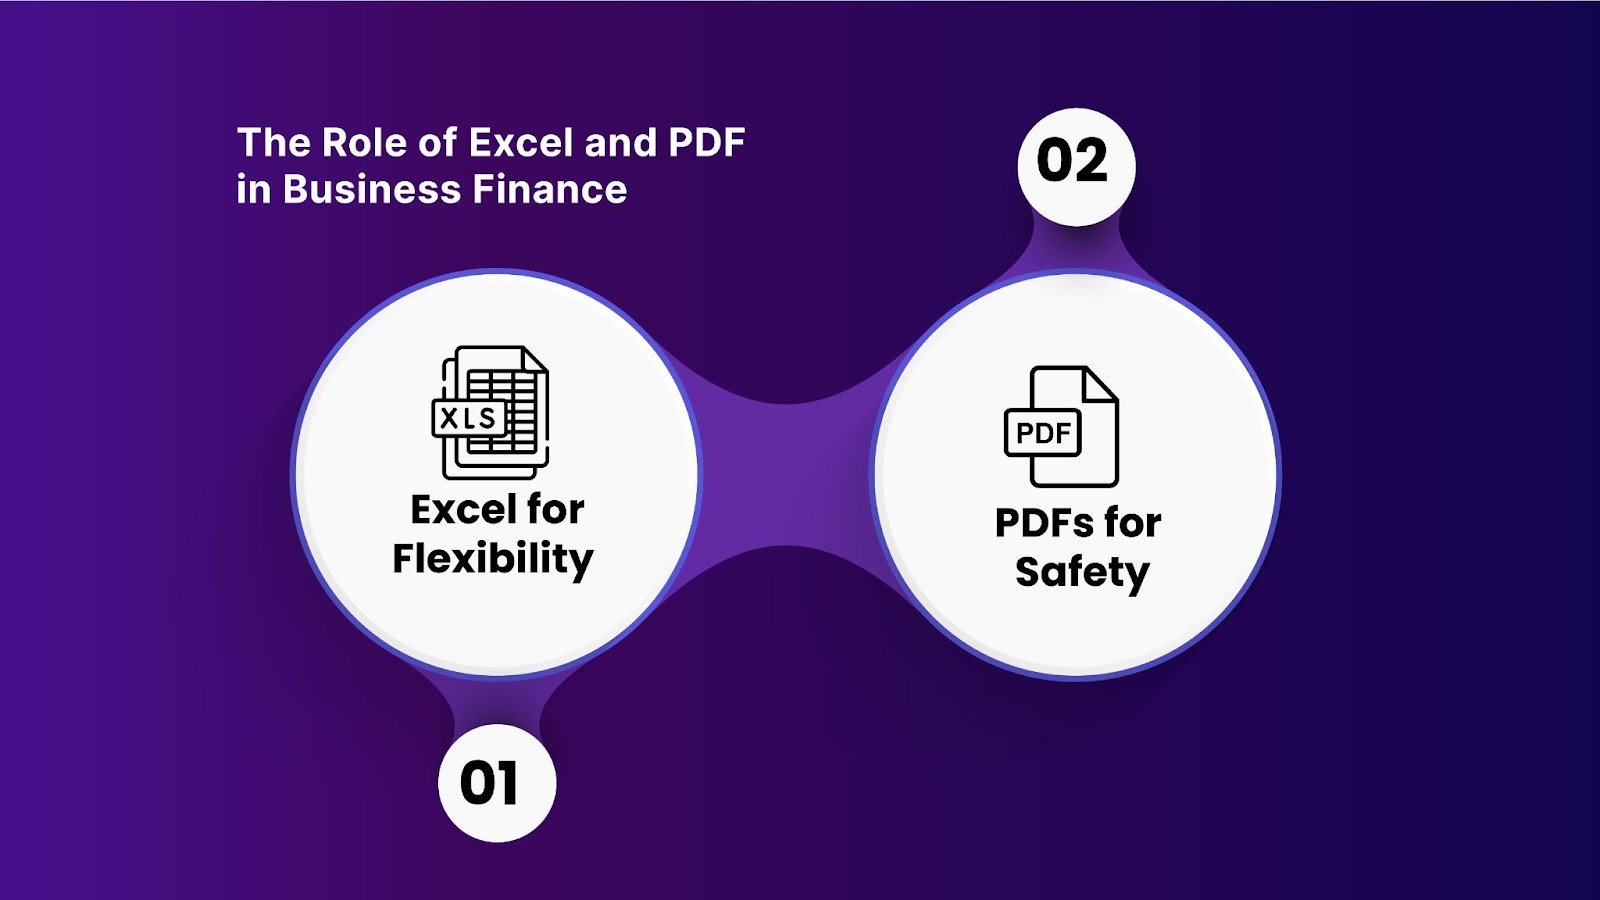 The Role of Excel and PDF in Business Finance